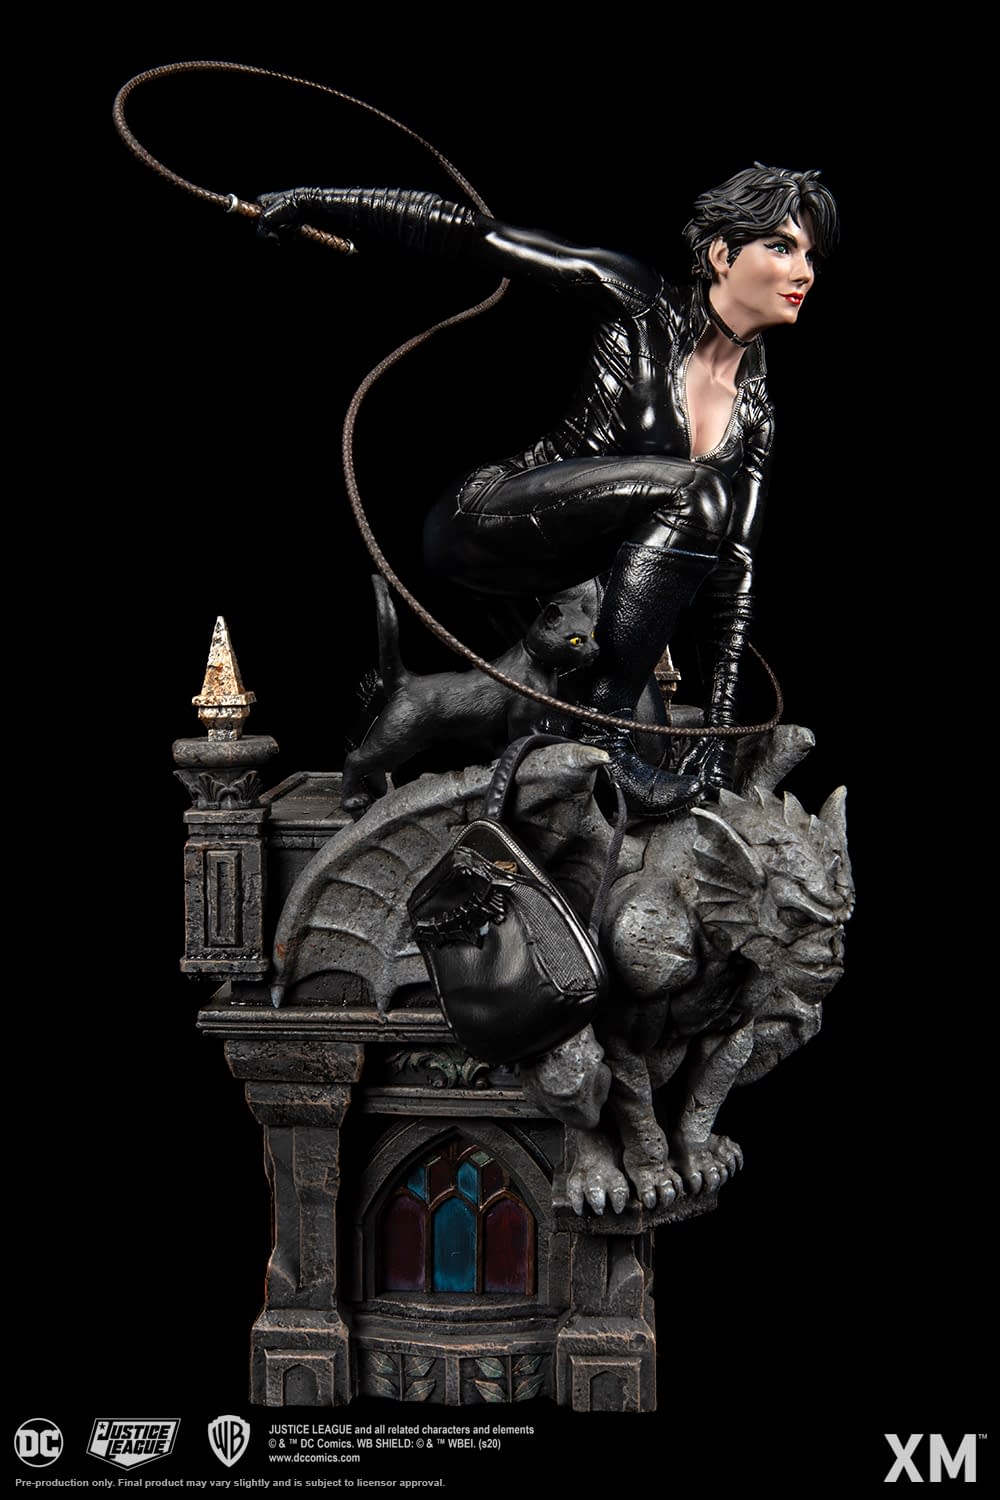 DC Premium Collectibles DC Rebirth Series Catwoman Statue from XM Studios